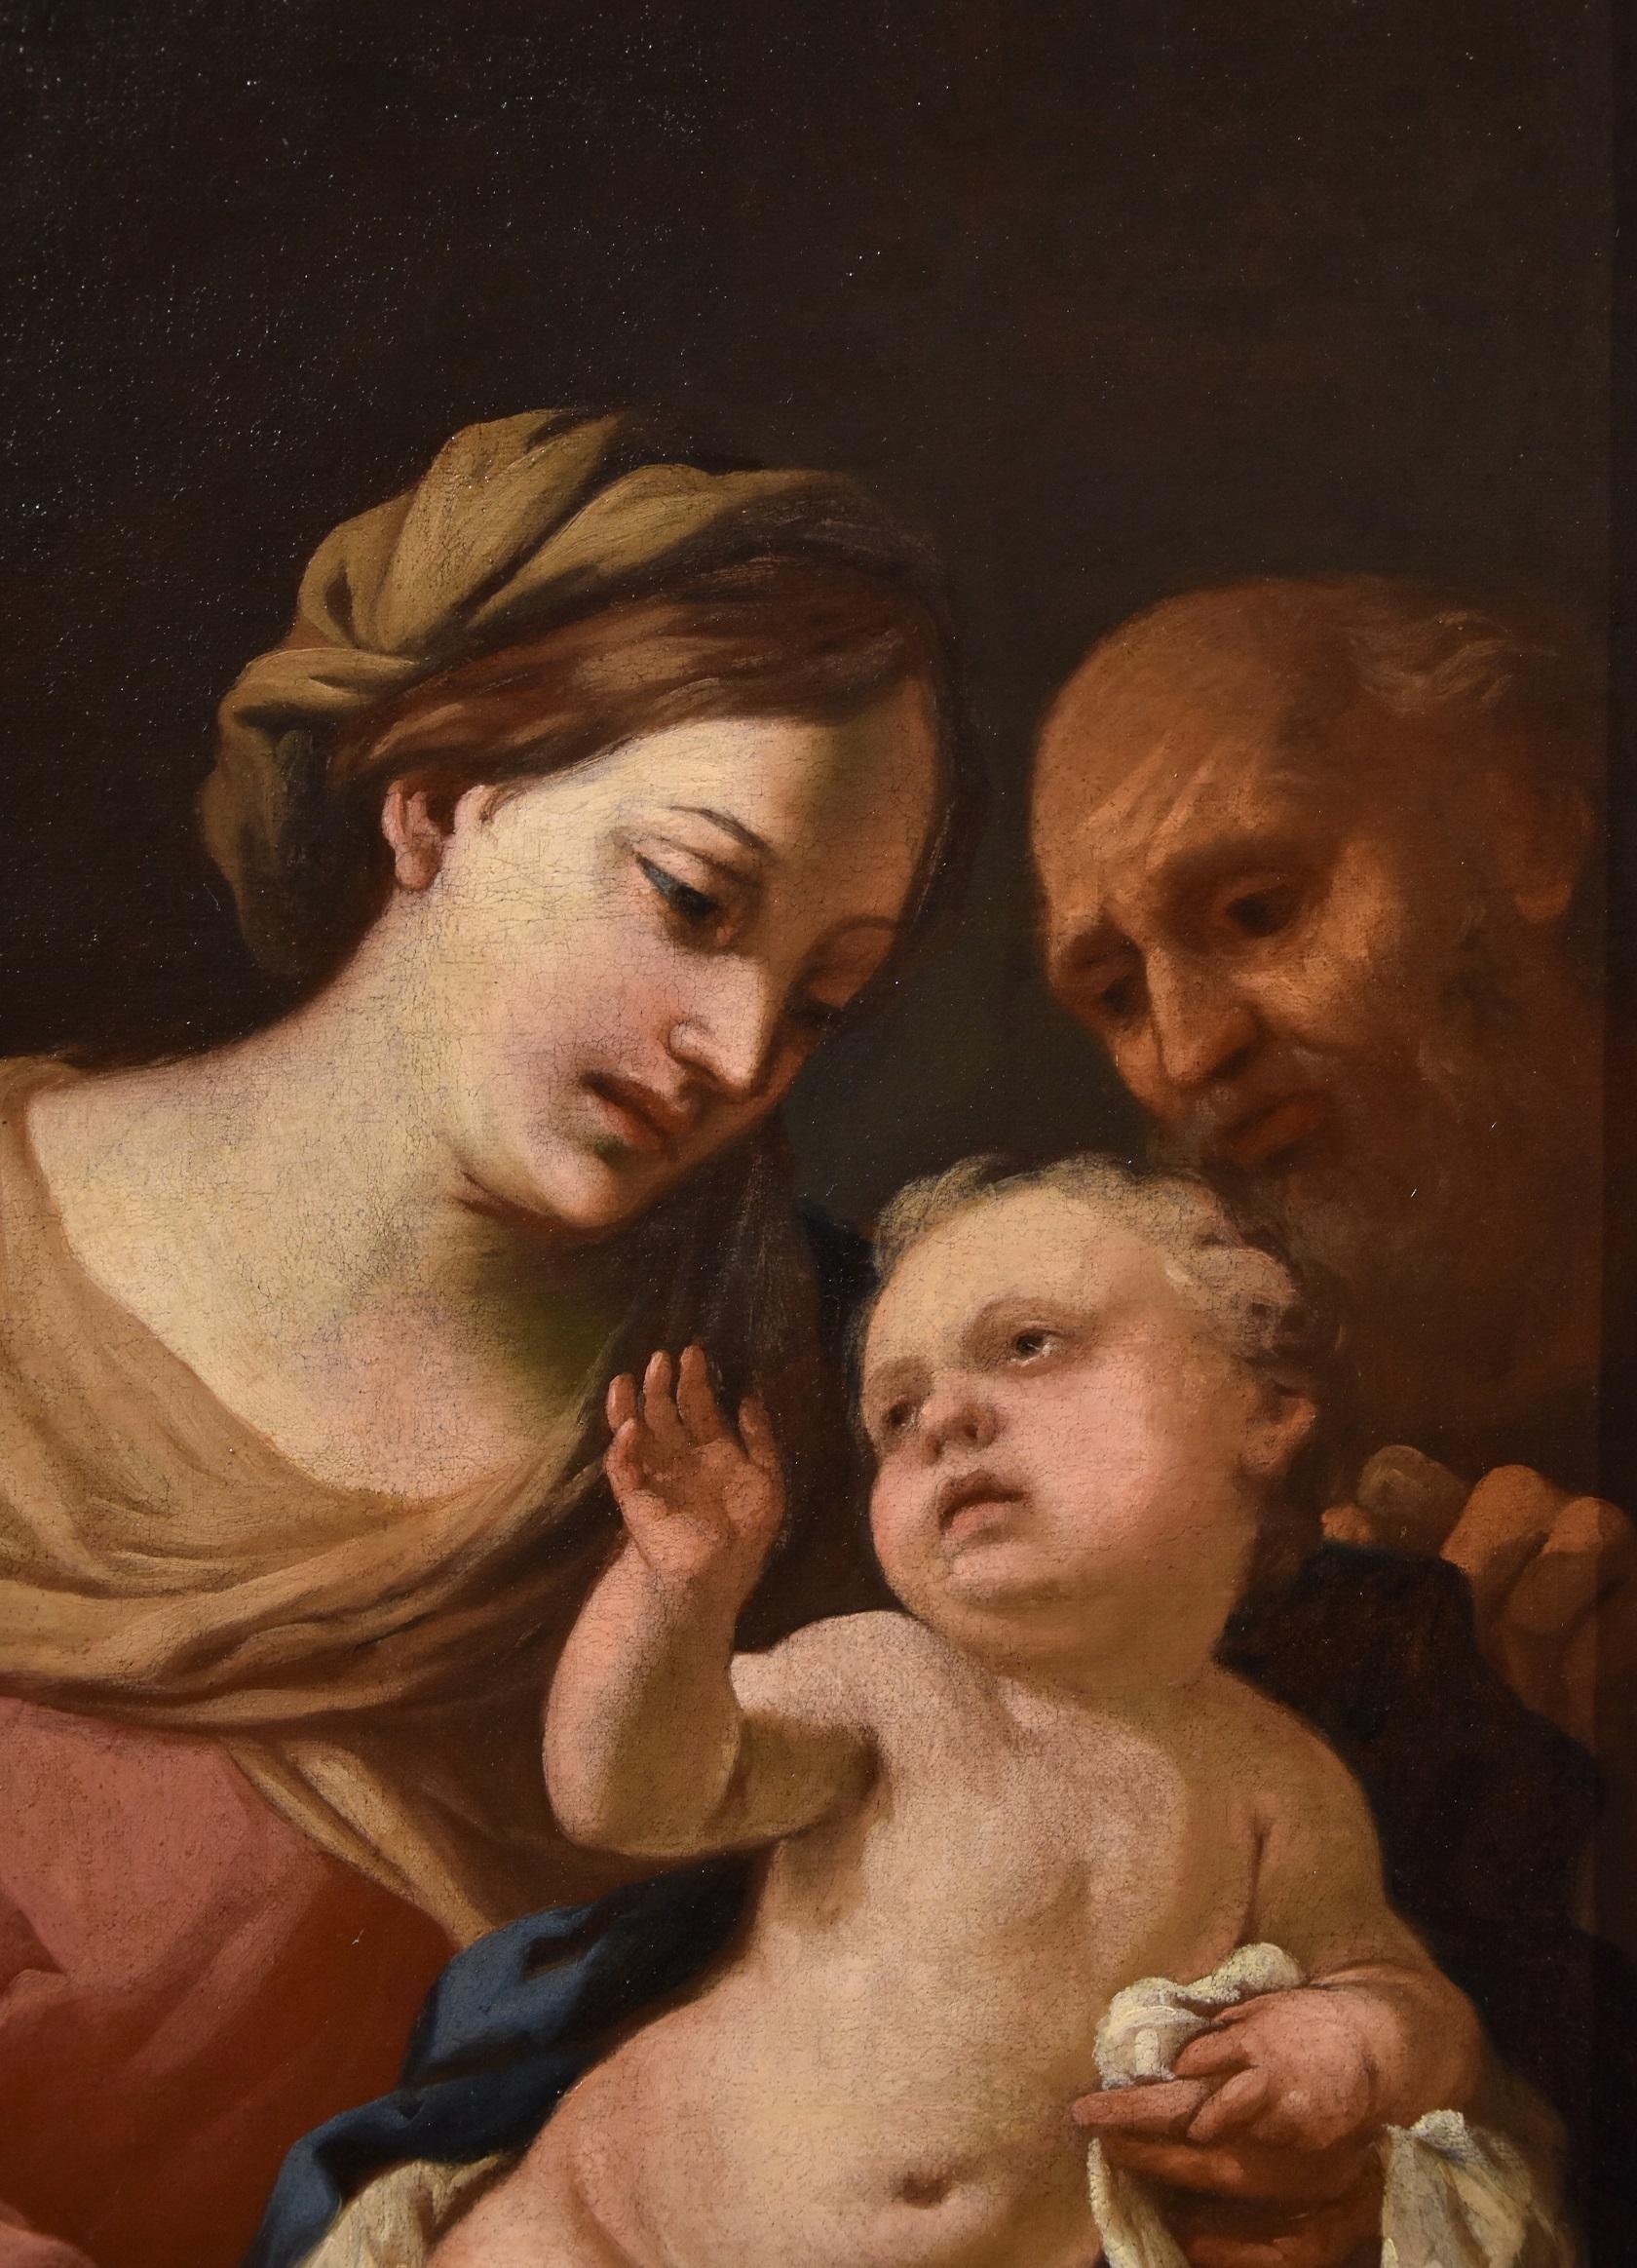 Genoese school of the second half of the seventeenth century
Circle of Domenico Piola (Genoa 1627-1703)
The Holy Family

Oil painting on canvas
83 x 68 cm. - in an antique frame 99 x 82 cm.

In the pleasant devotional work proposed, which depicts a